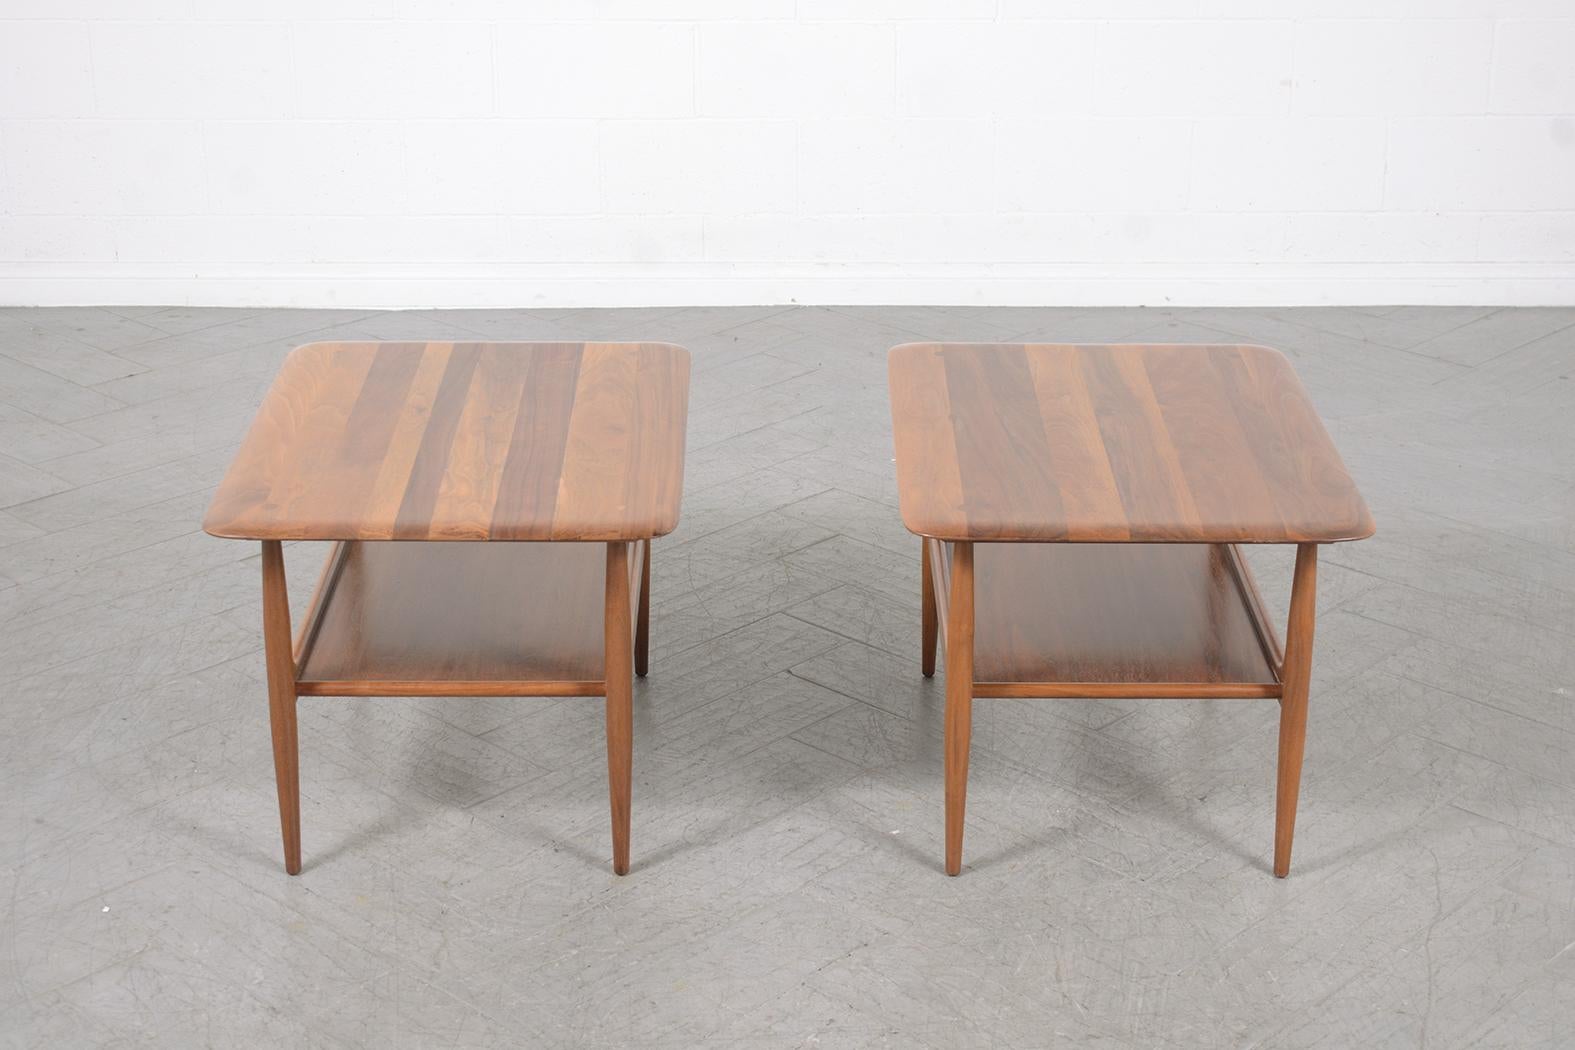 Patinated 1960s Vintage Mid-Century Modern Walnut Side Tables by Brown Saltman